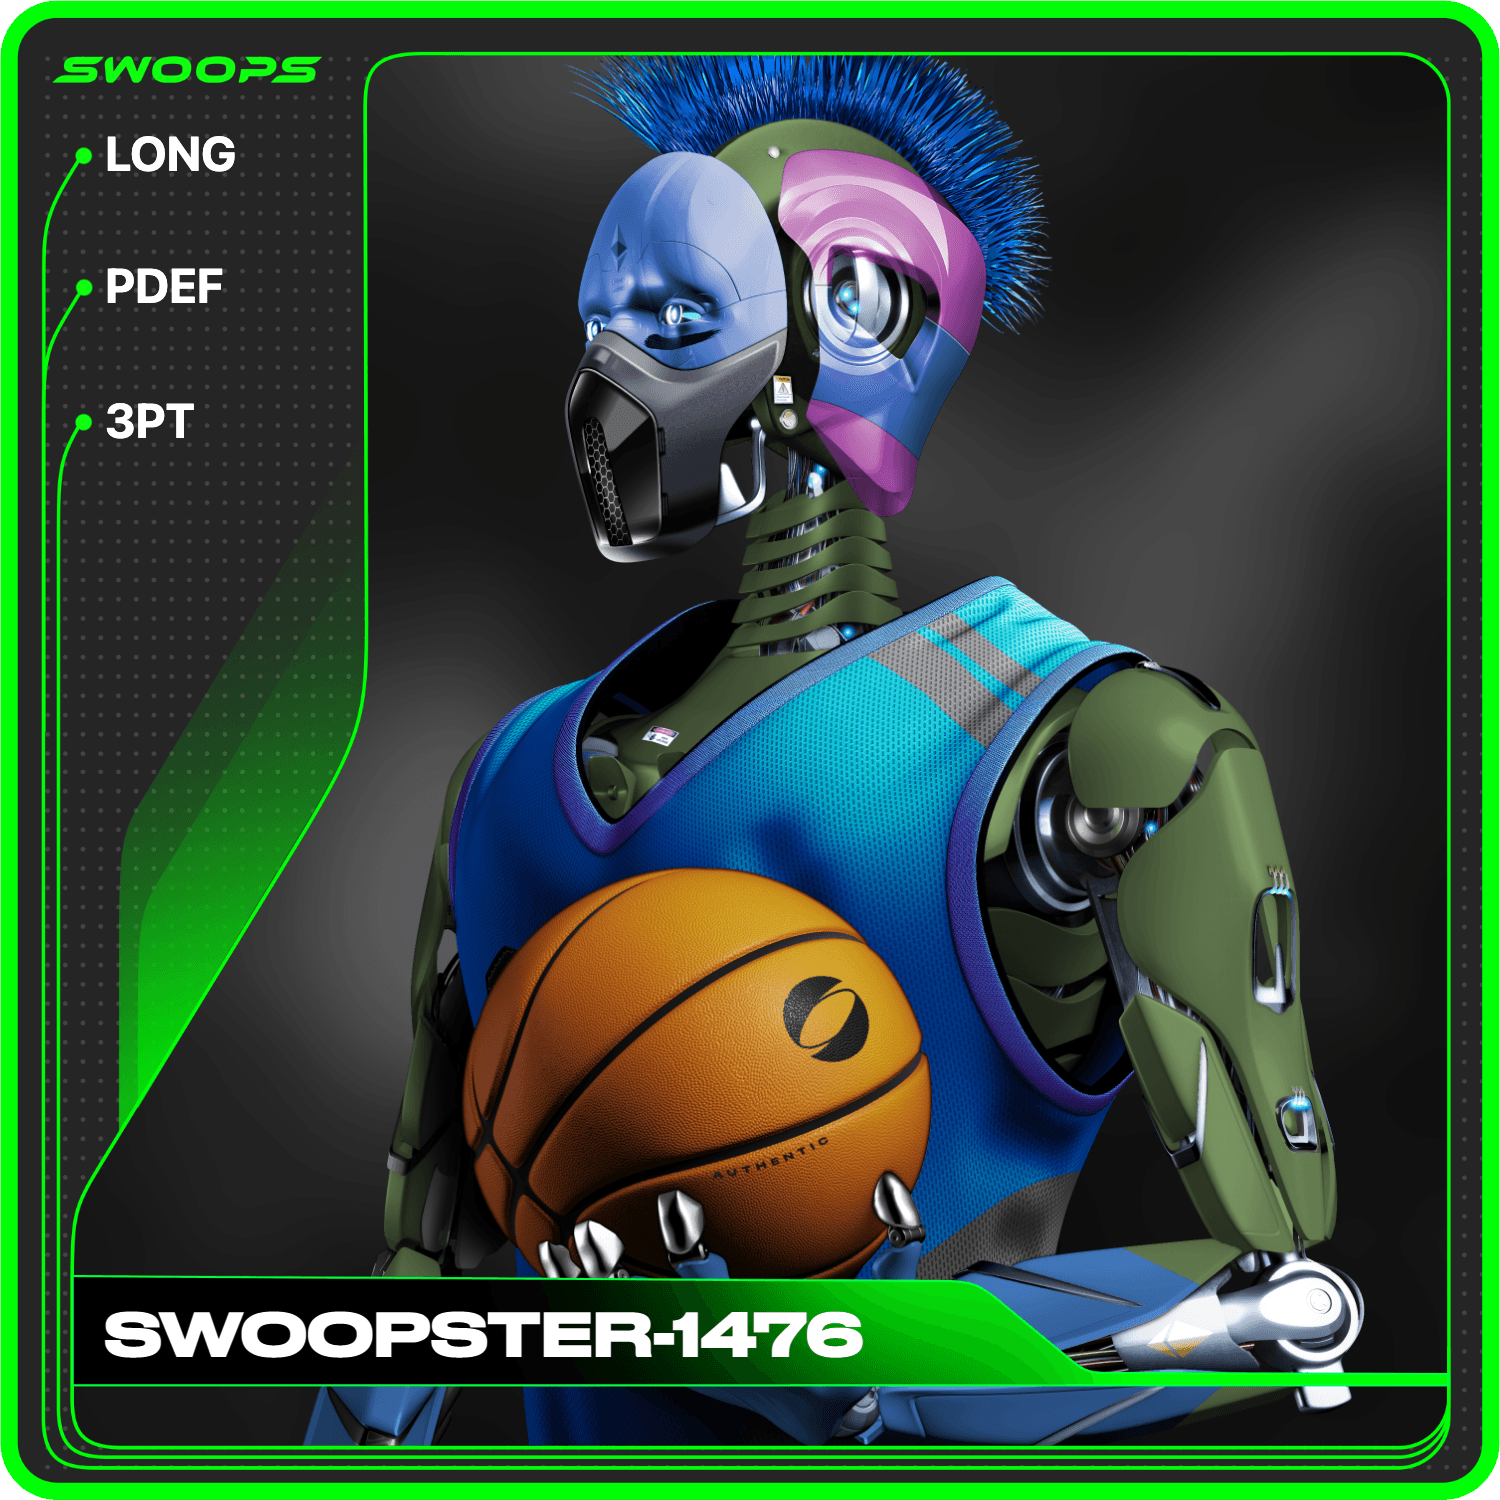 SWOOPSTER-1476